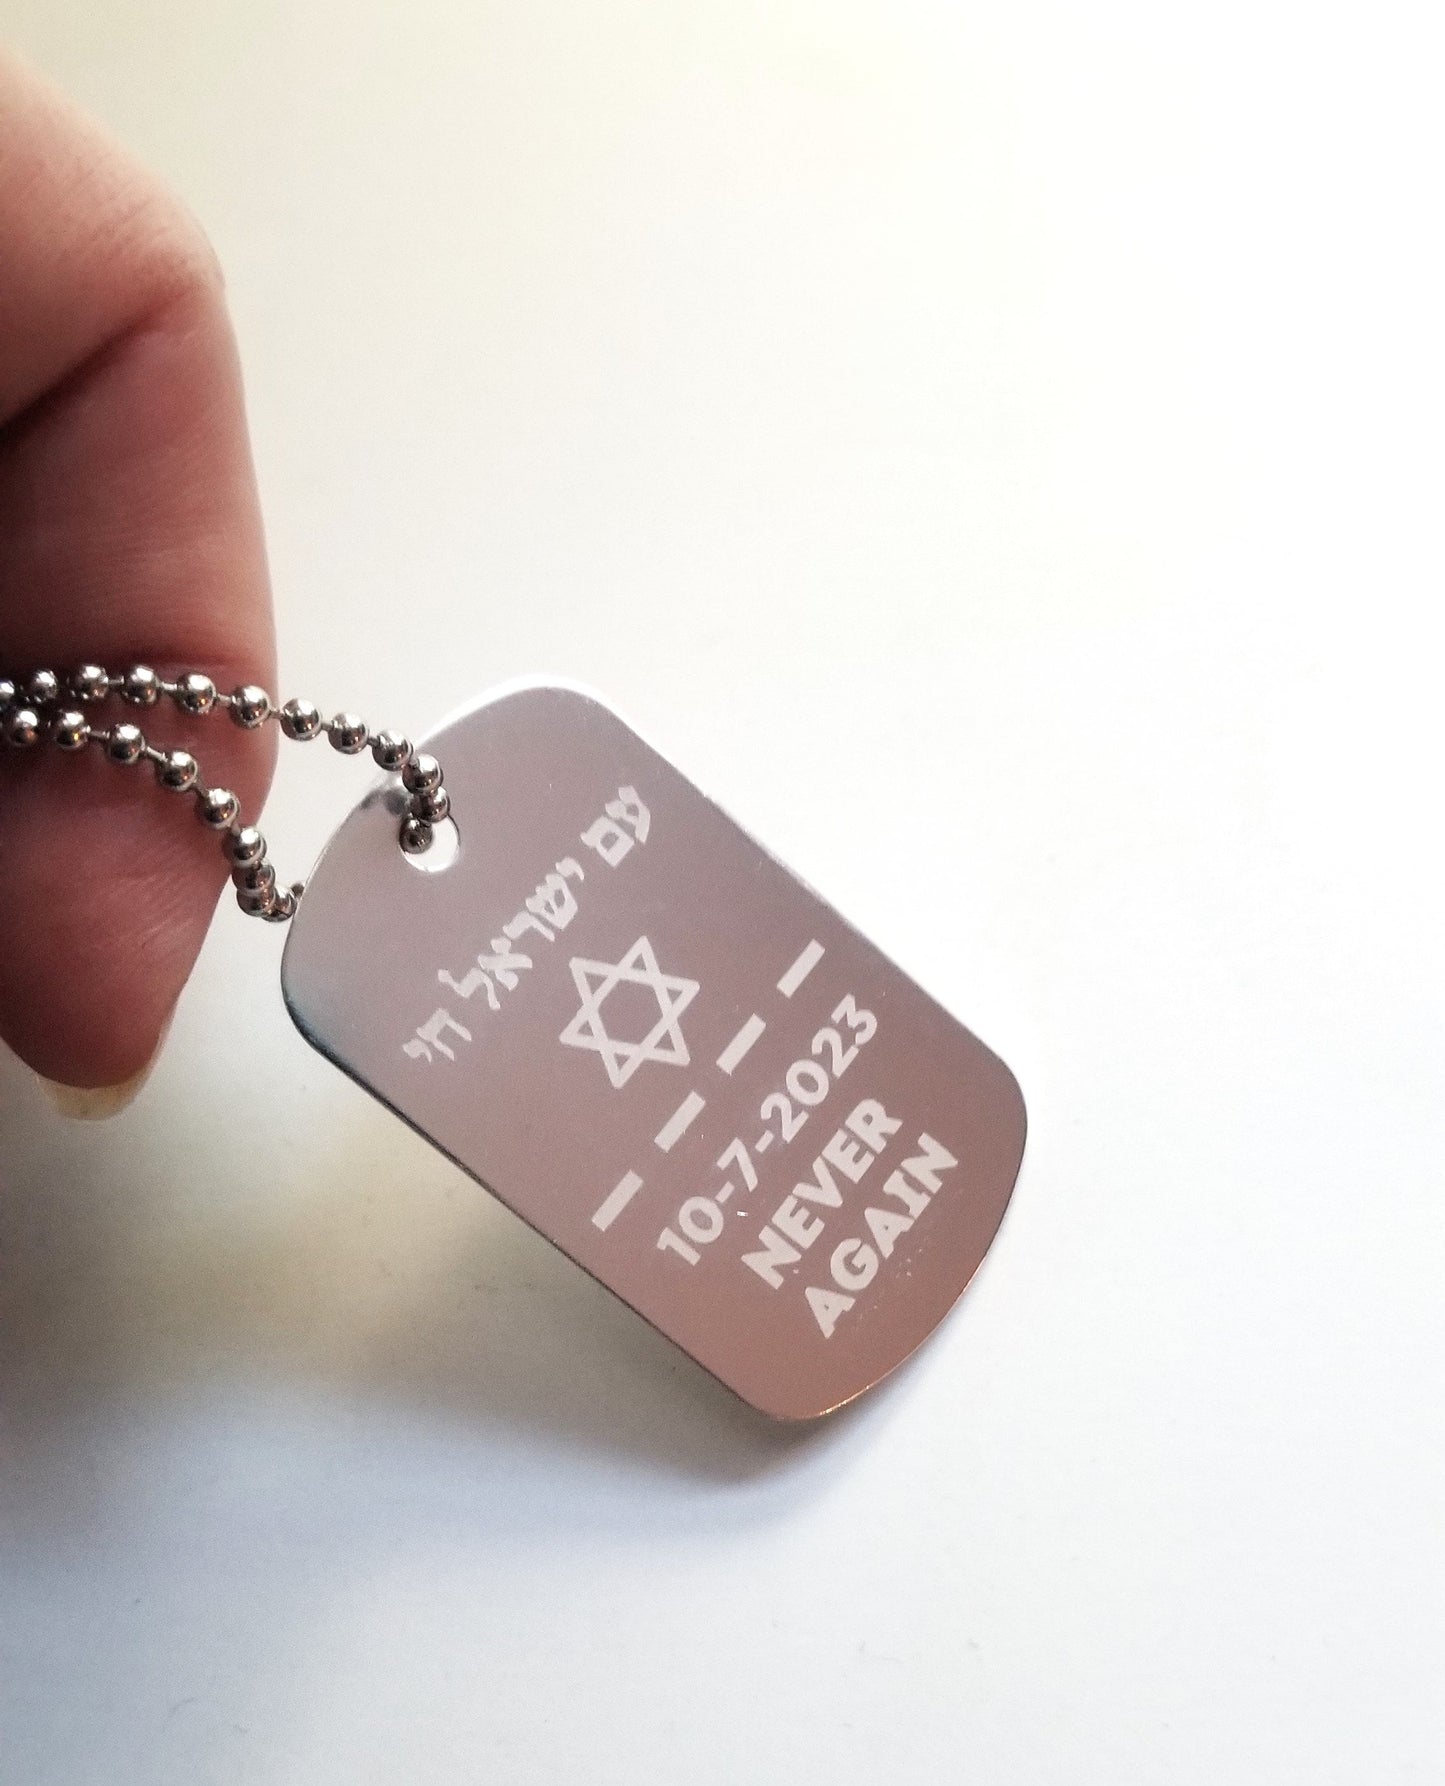 Am Israel Chai Military tag, Israeli military army necklace in black or silver, Hebrew Jewelry, Stand with Israel, Never again Jewish gift